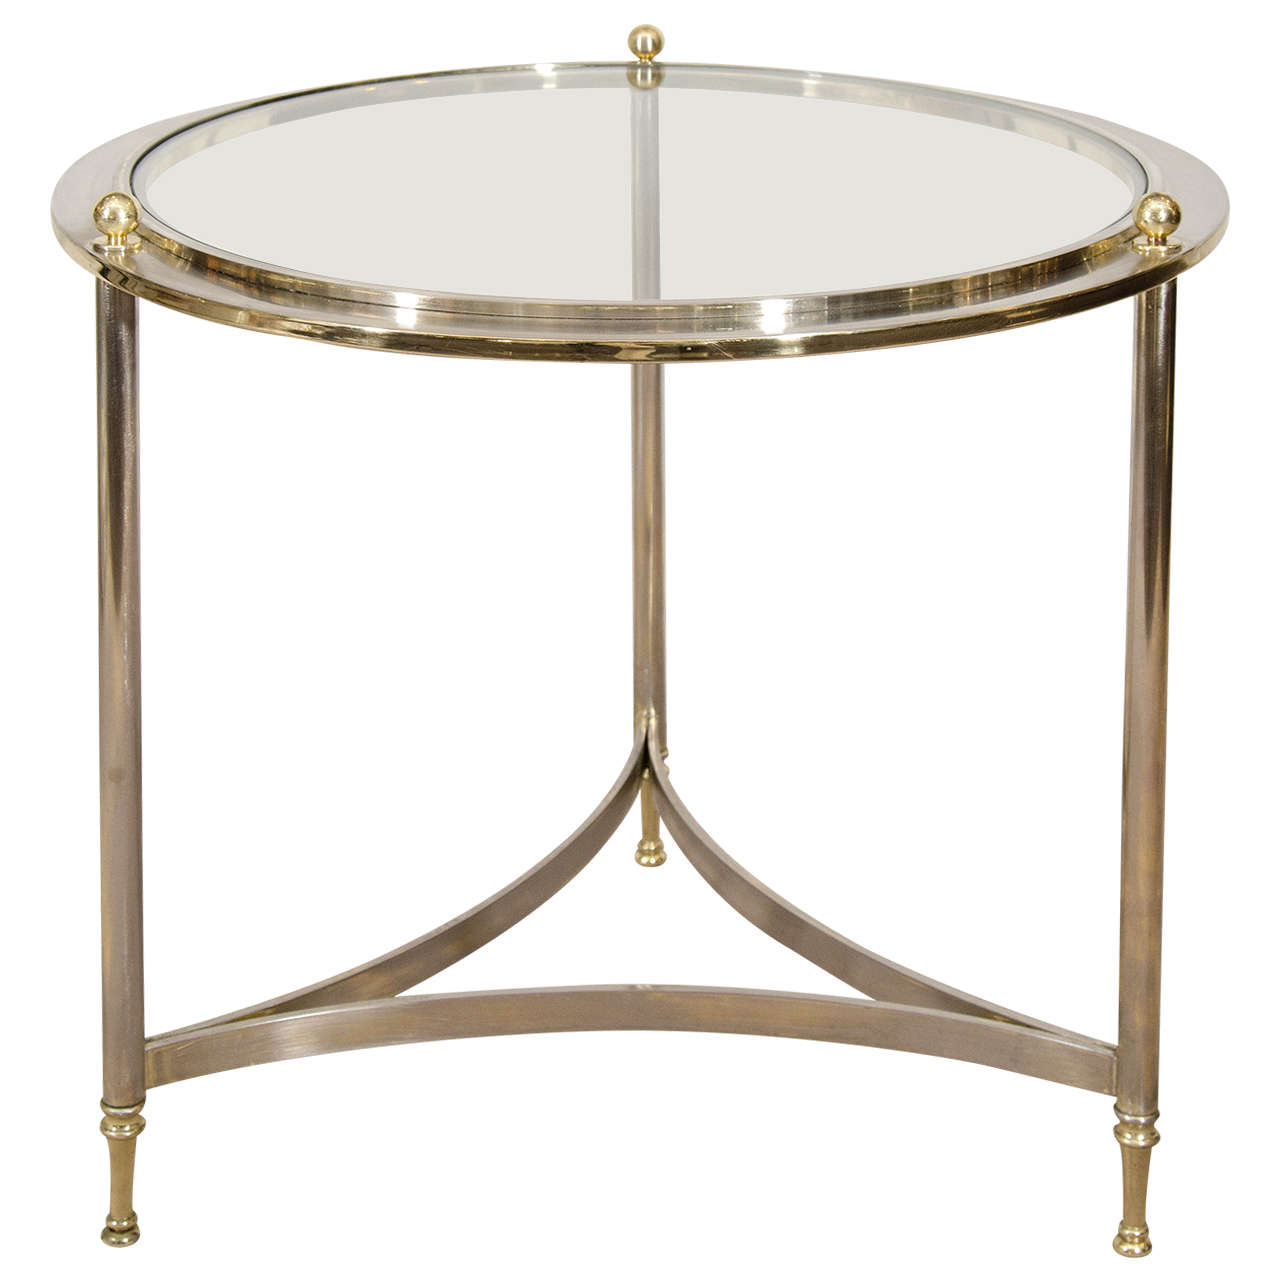 Midcentury Round Steel Table with Brass Accents by Design Institute of America